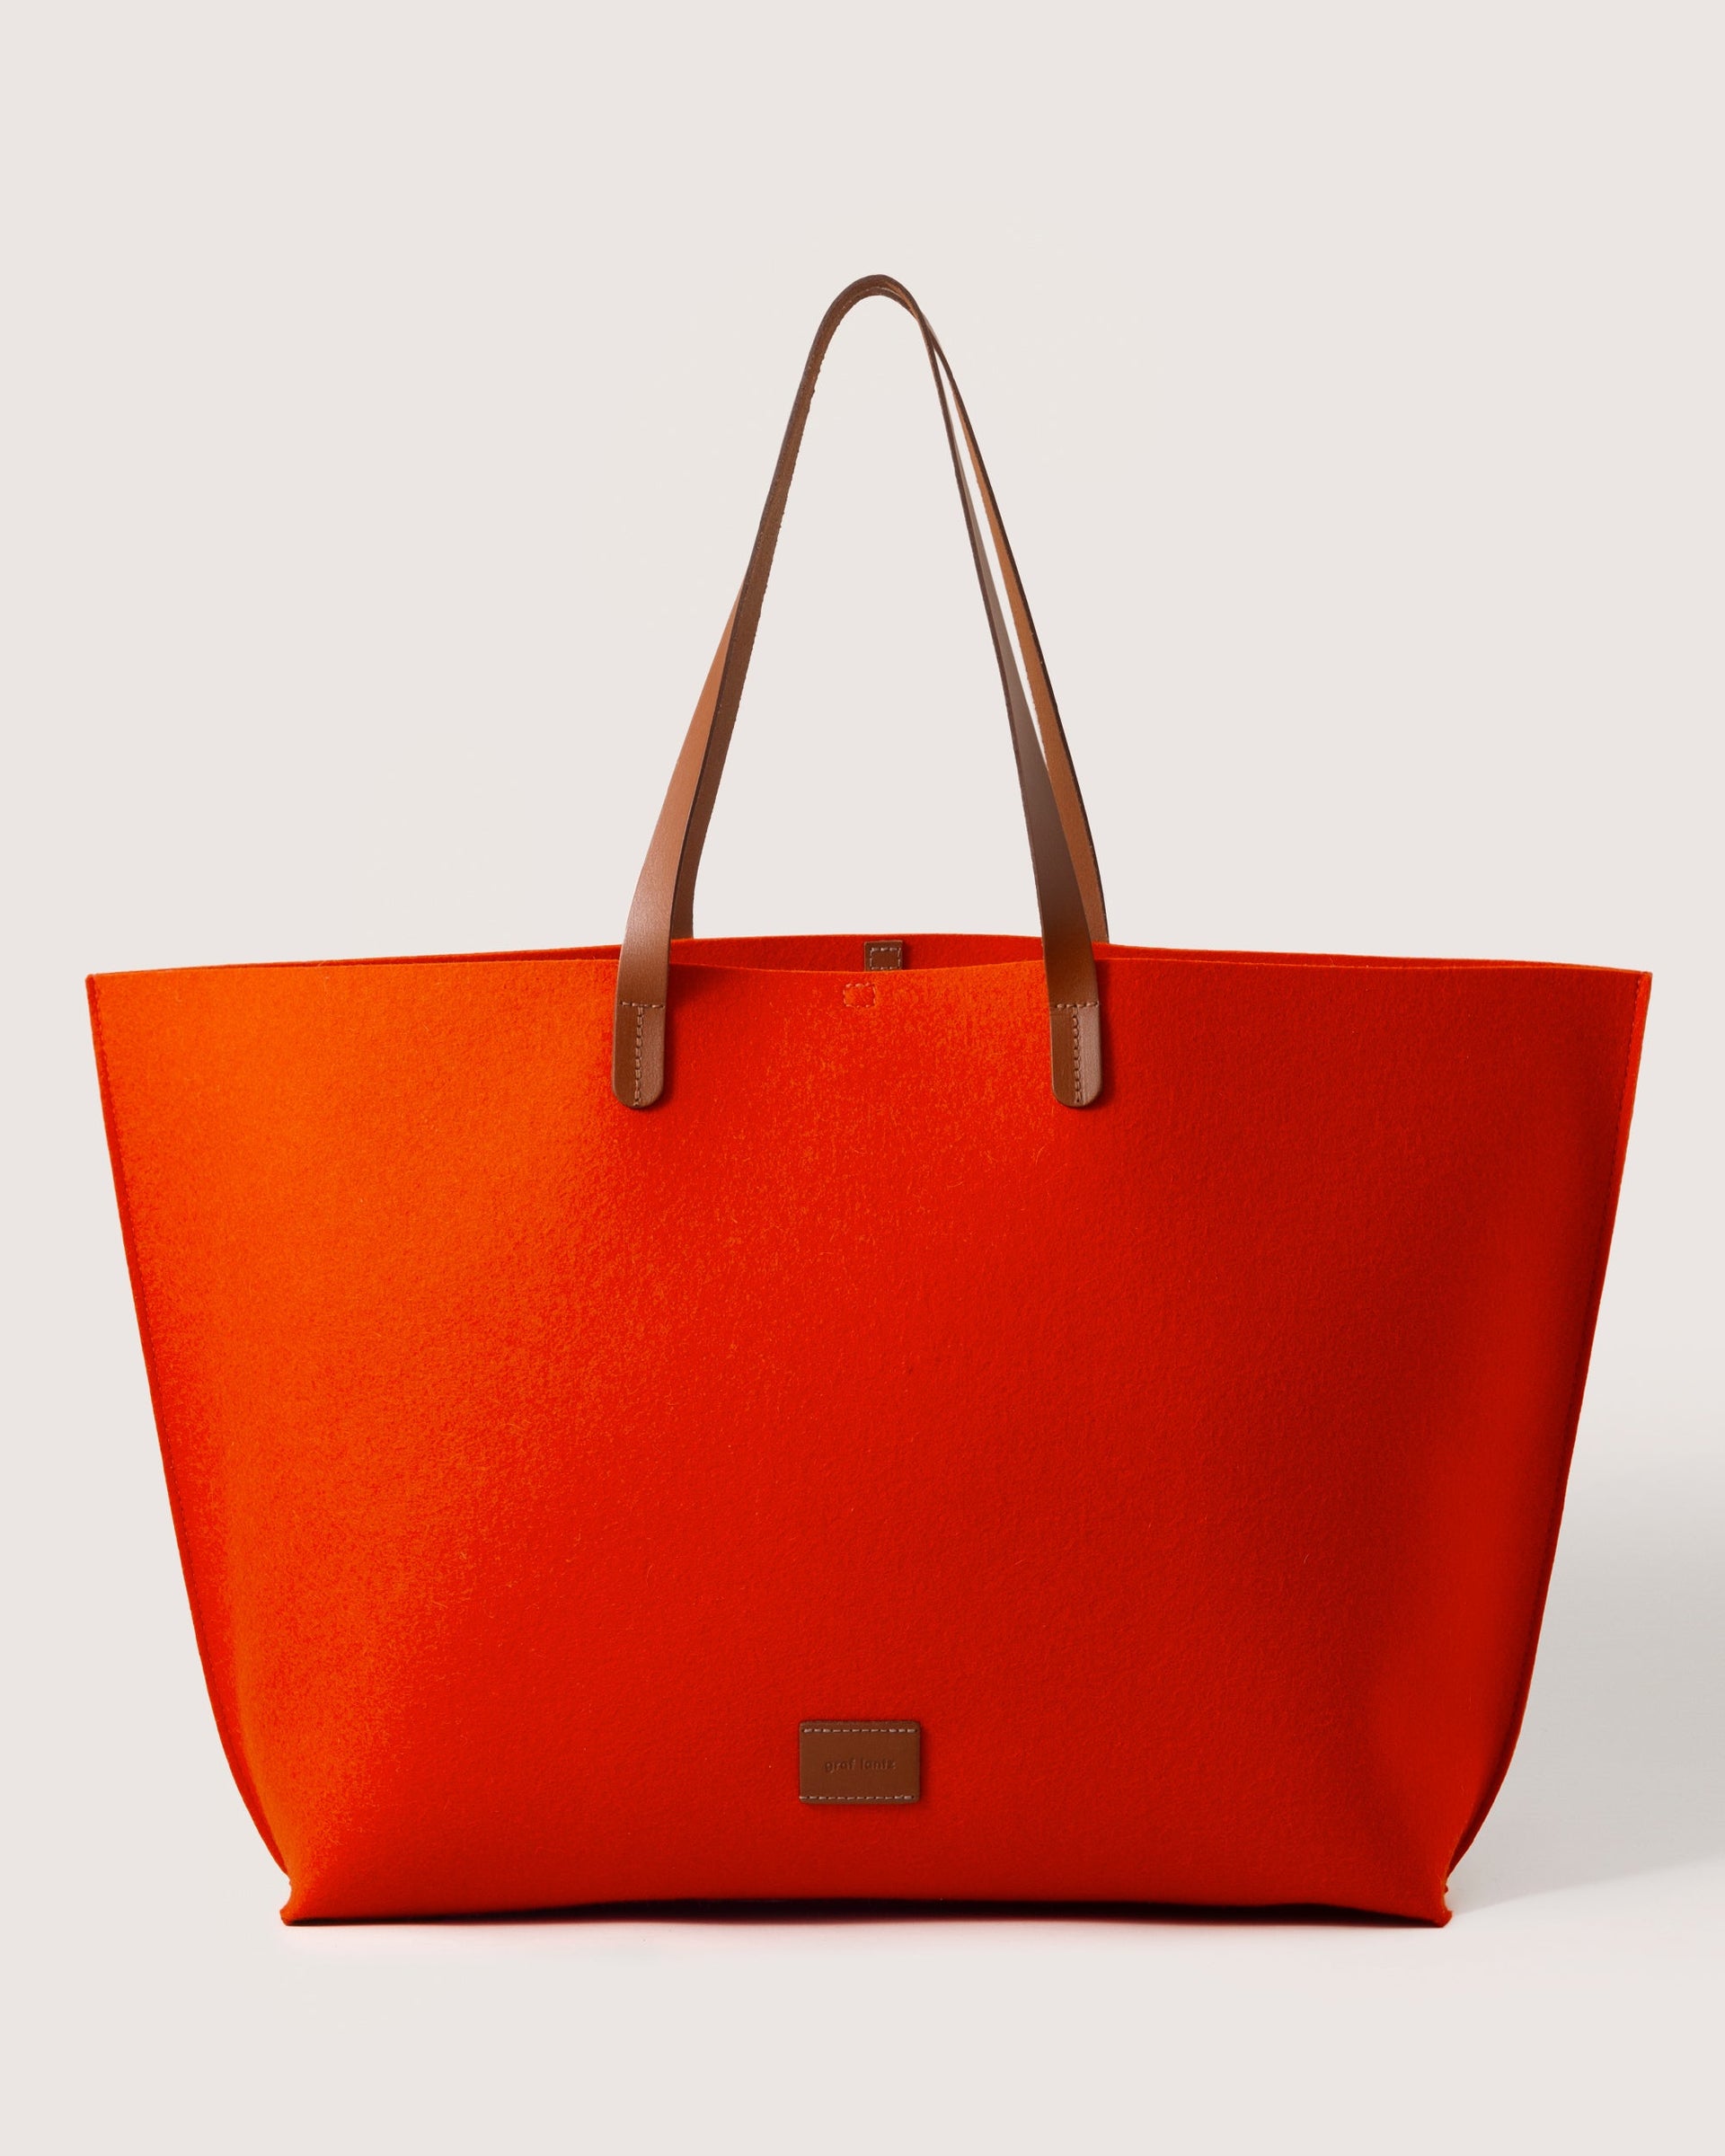 Orange Hana Merino Wool Boat Bag with brown leather handles and brand logo, front view, white background.